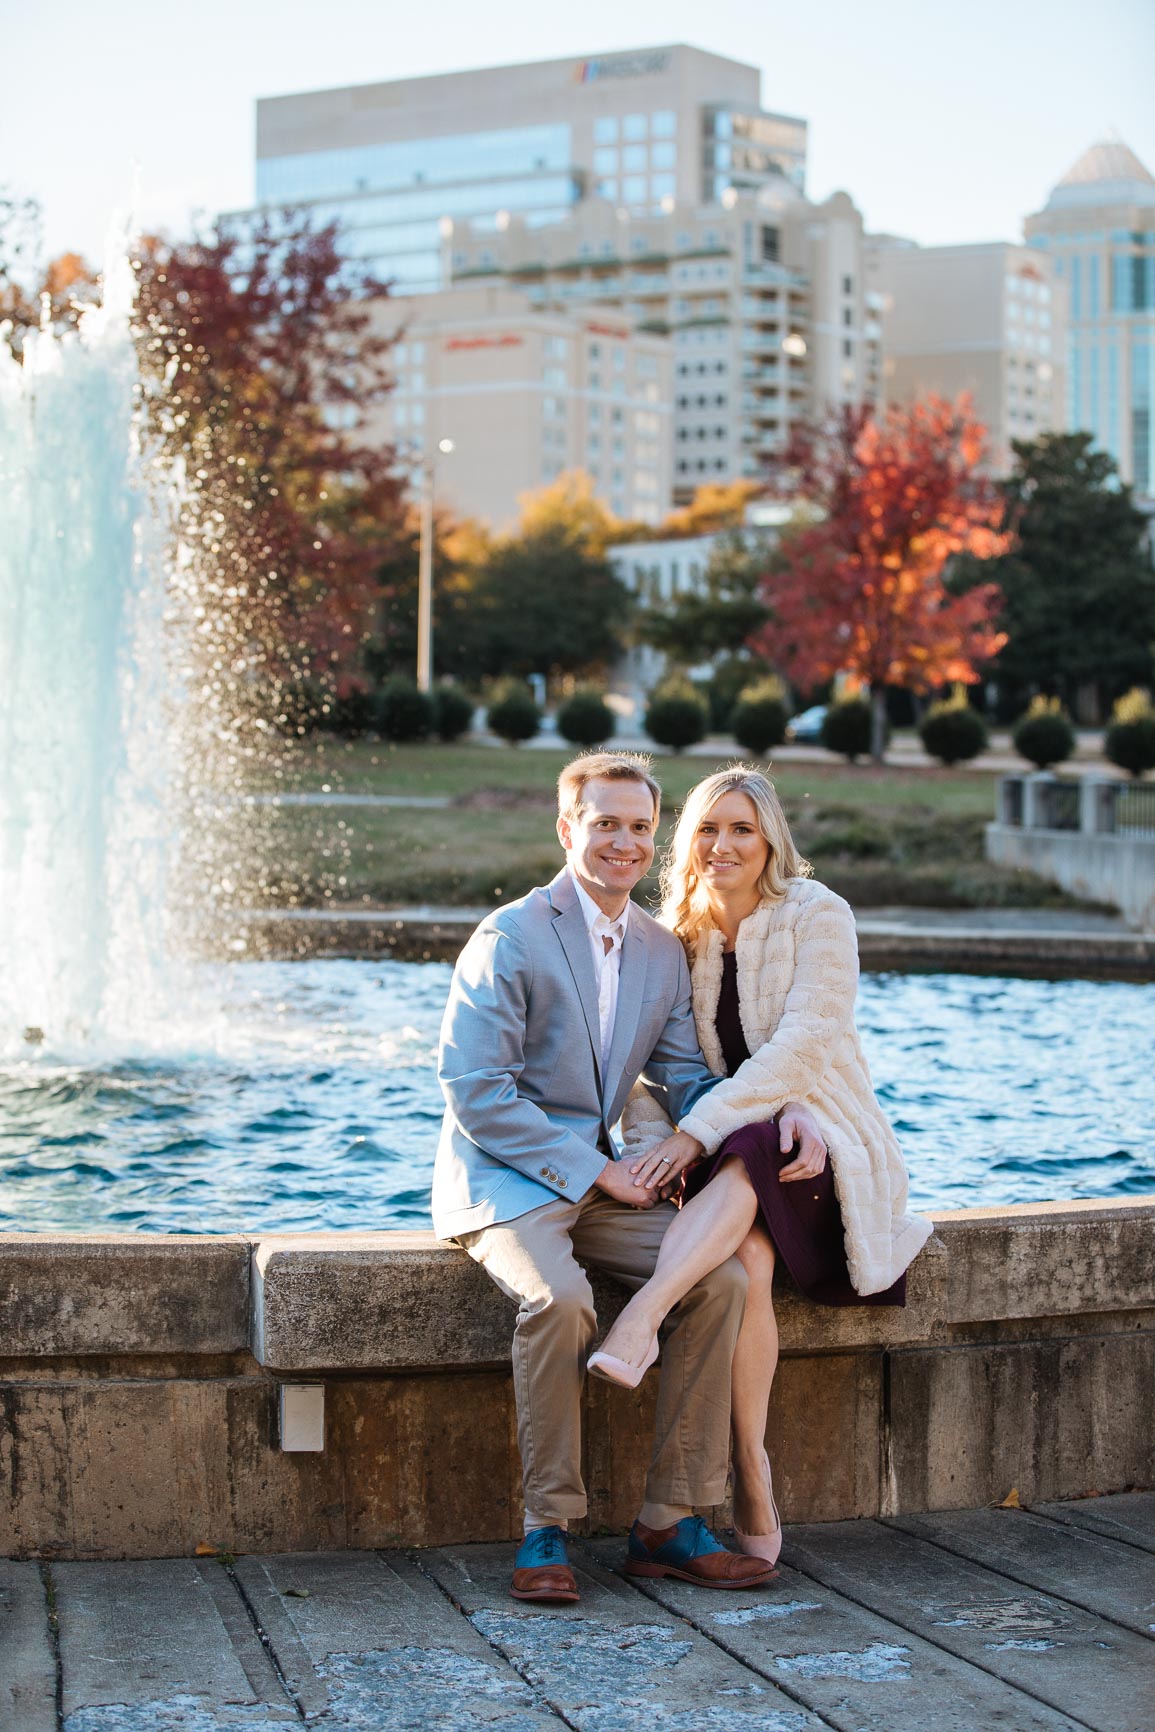 Uptown Charlotte engagement session at Marshall Park by nhieu tang photography | nhieutang.com